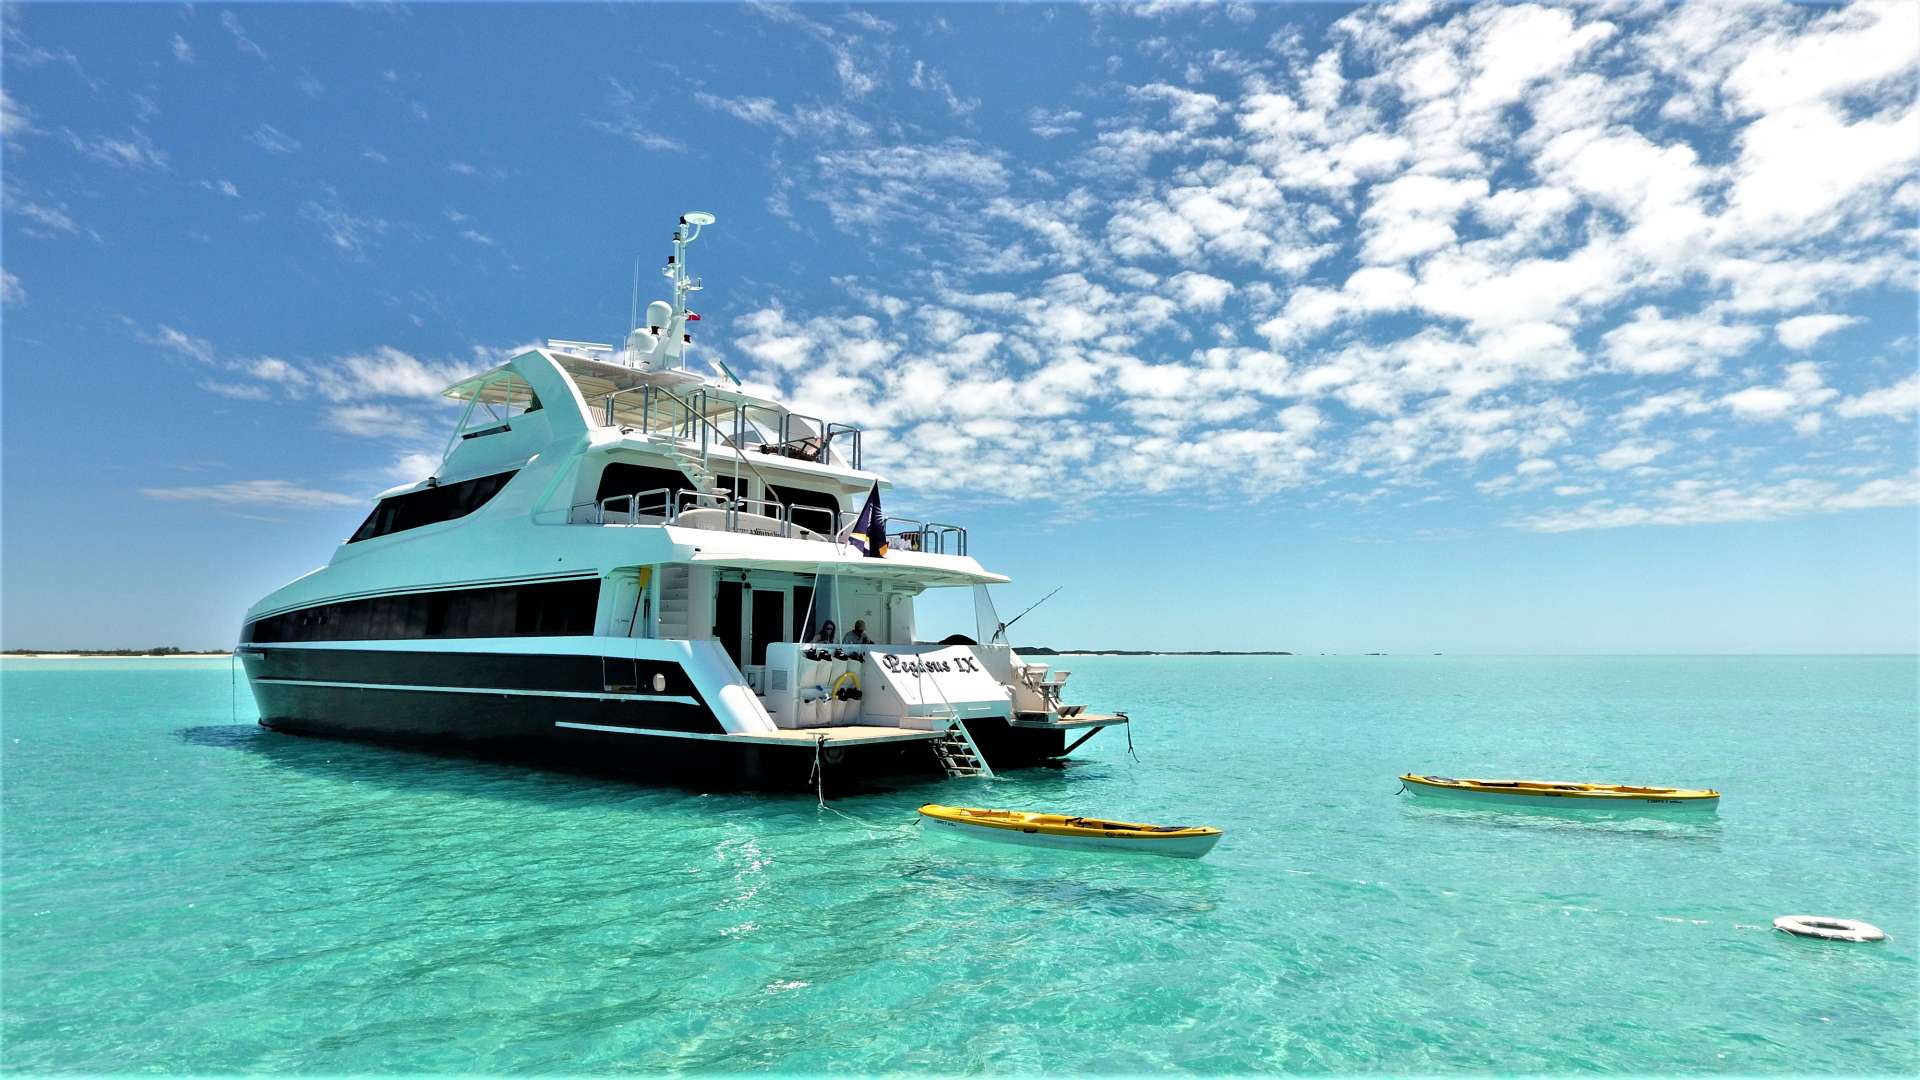                                                                                      IMPORTANT MESSAGE 
DUE TO THE CURRENT UNCERTAIN TIMES, THE OWNER OF PEGASUS HAS AGREED TO OFFER  PENALTY FREE CANCELLATIONS ON ALL CHARTERS BOOKED ONBOARD PEGASUS IX UNTIL THE OFFICIAL END OF THE PANDEMIC OR ANY OTHER PANDEMIC.

This 92ft Jet Drive Power Cat is is made for cruising in the Bahamas. Offering  her guests three decks of luxurious indoor and outdoor living space combined with its ability to deliver them to the far reaches of the Exumas, in comfort, safety and at speed.
With a maximum draft of 4.1ft (1.4m), she can explore the shallows of the Bahamas like no other yacht in her class. capable of exploring and anchoring in depths as little as 5ft. promising an up close and personal experience of the Islands beaches and bays, keeping you in calm waters where you can swim out of the currents.
Her 2 engines deliver 4000Hp of thrust via a modern Jet drive system that accelerates her to an astonishing 33 knots with ease. Ensuring limited time at sea and more time on anchor, enjoying the warm Bahamian waters.
Sleeps 6 guests in 2x kings and 1x queen. All en-suite. 
3 highly experienced permanent crew who have been aboard since 2016.
